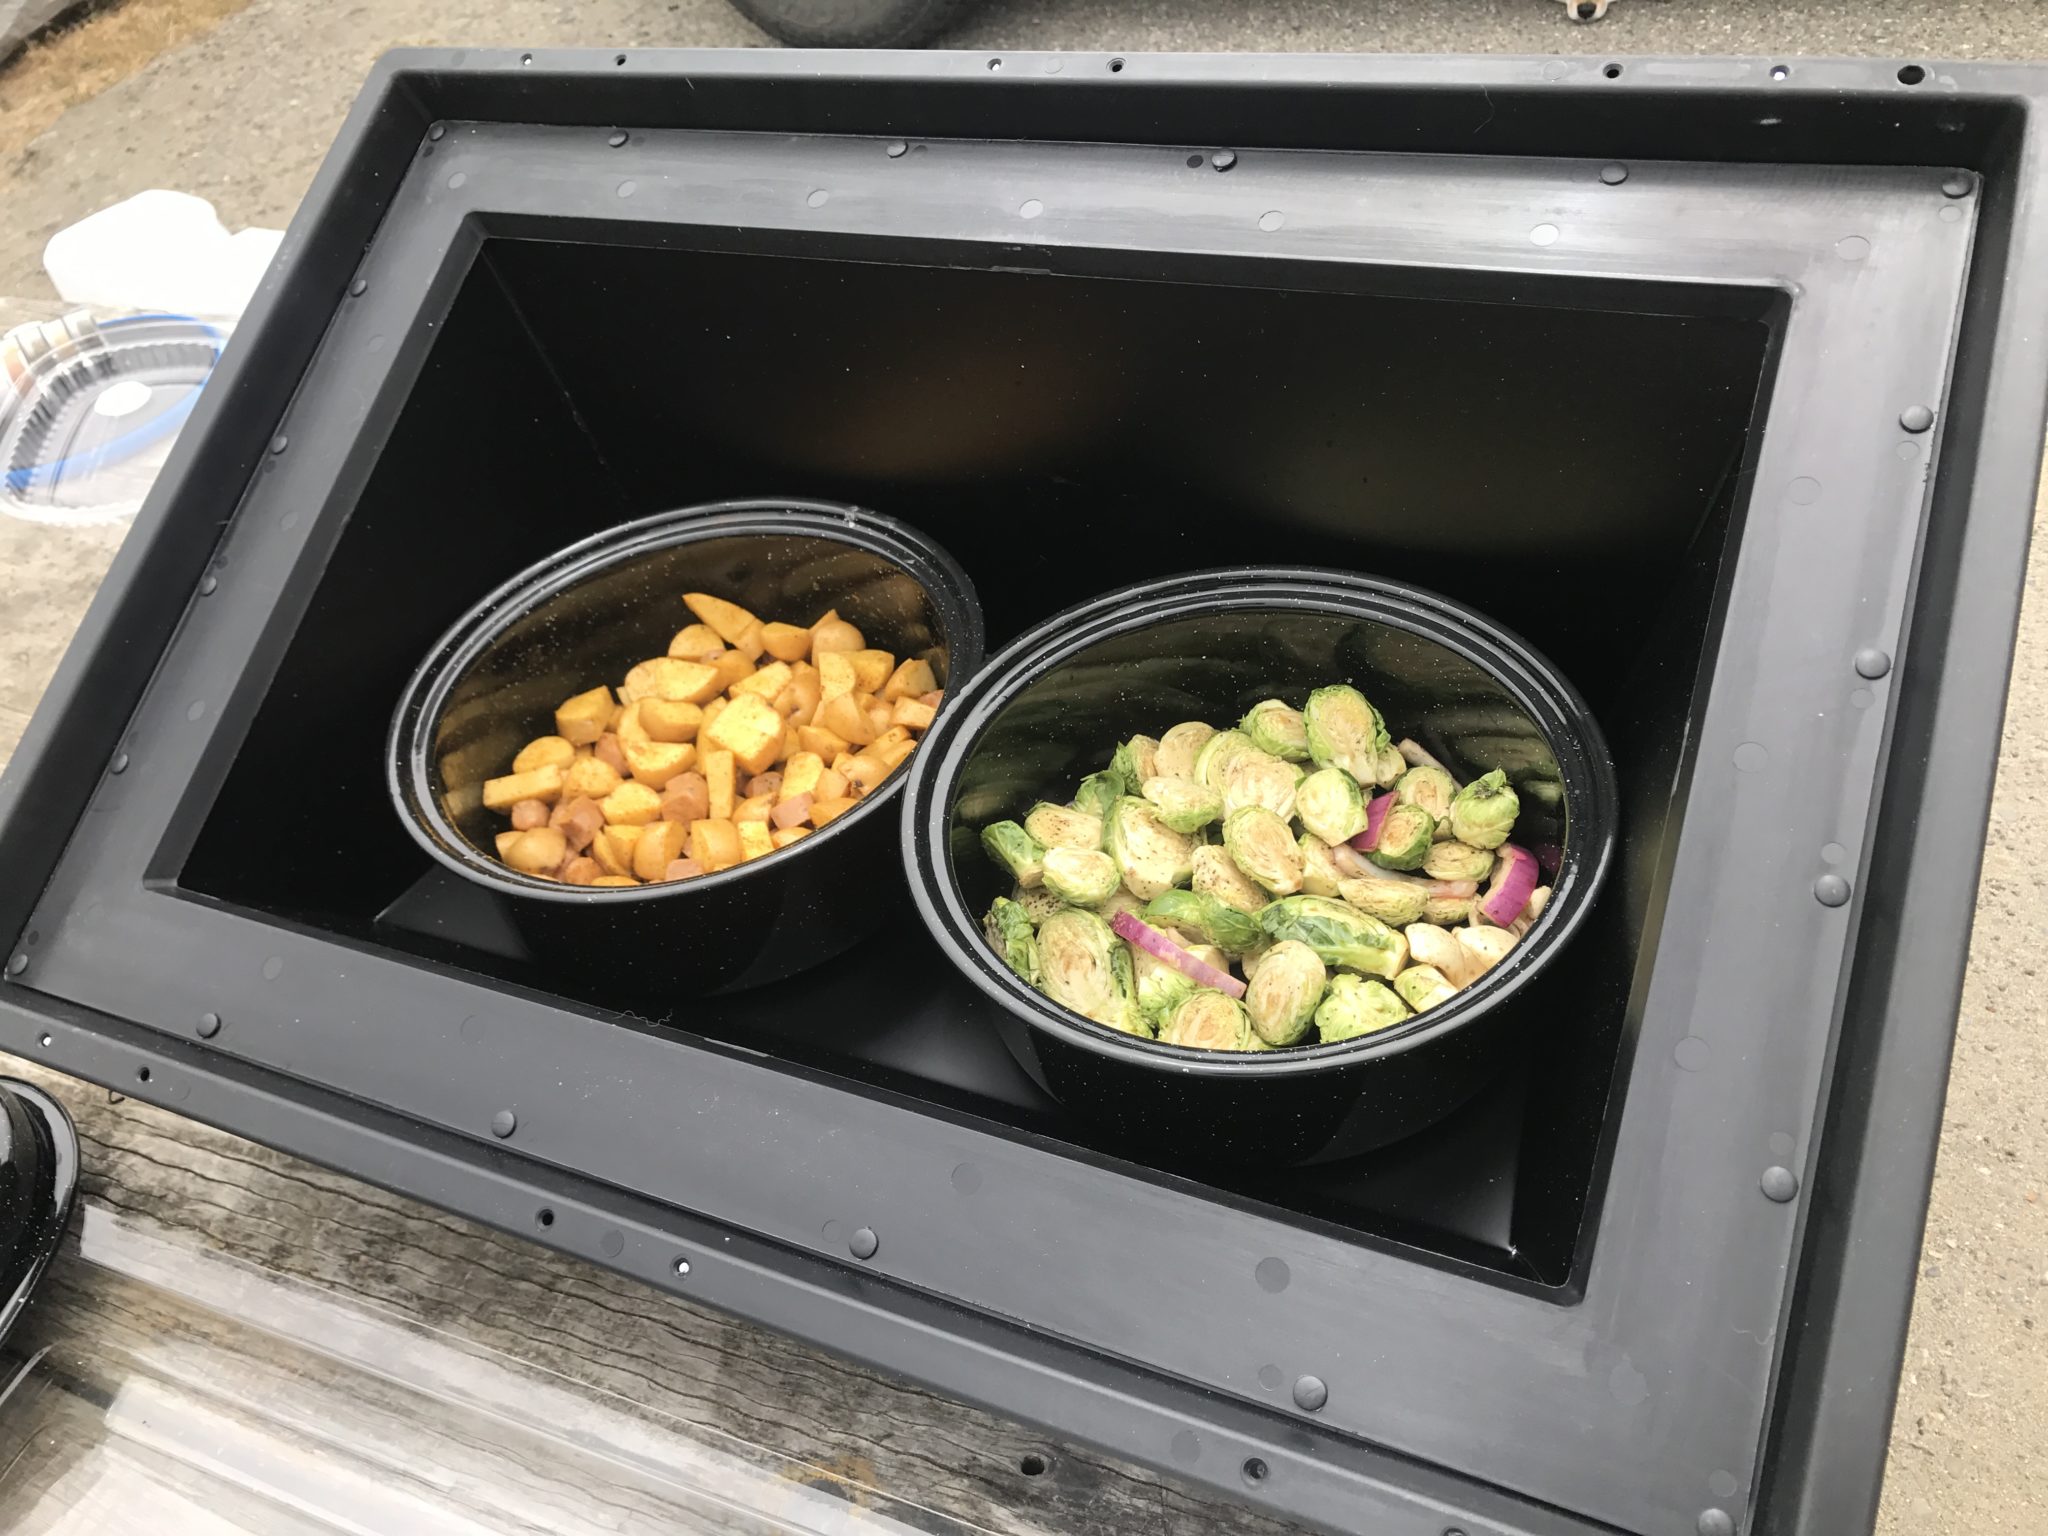 This solar kitchen comes with a pot and a solar-cooking device